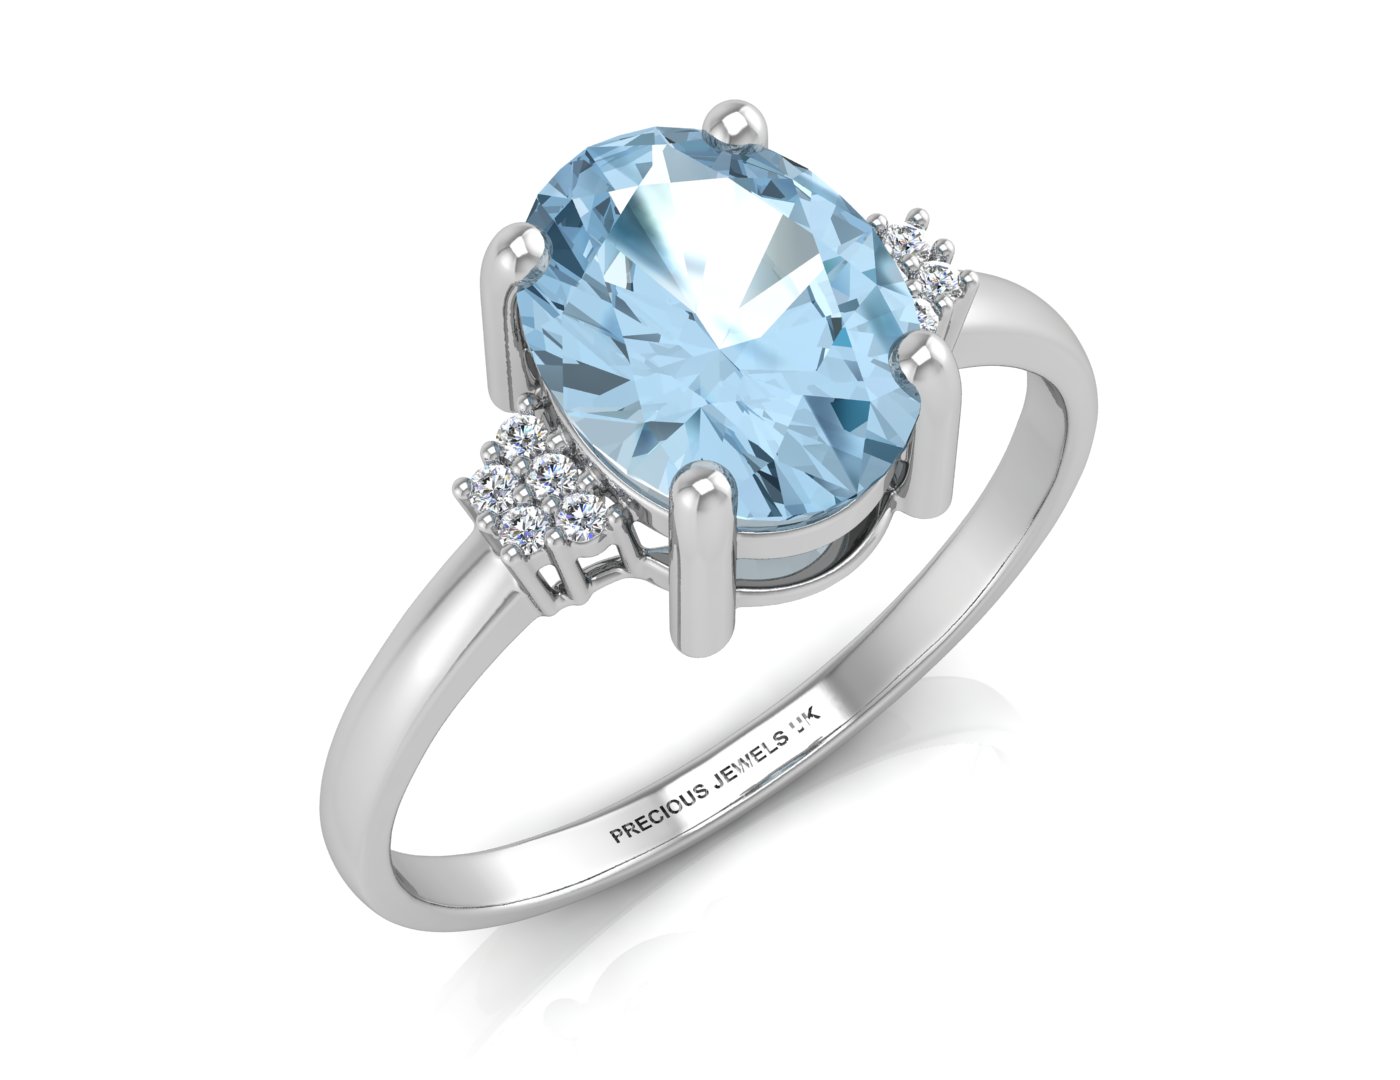 9ct White Gold Diamond And Blue Topaz Ring (BT1.89) 0.03 Carats - Valued By GIE £1,210.00 - An